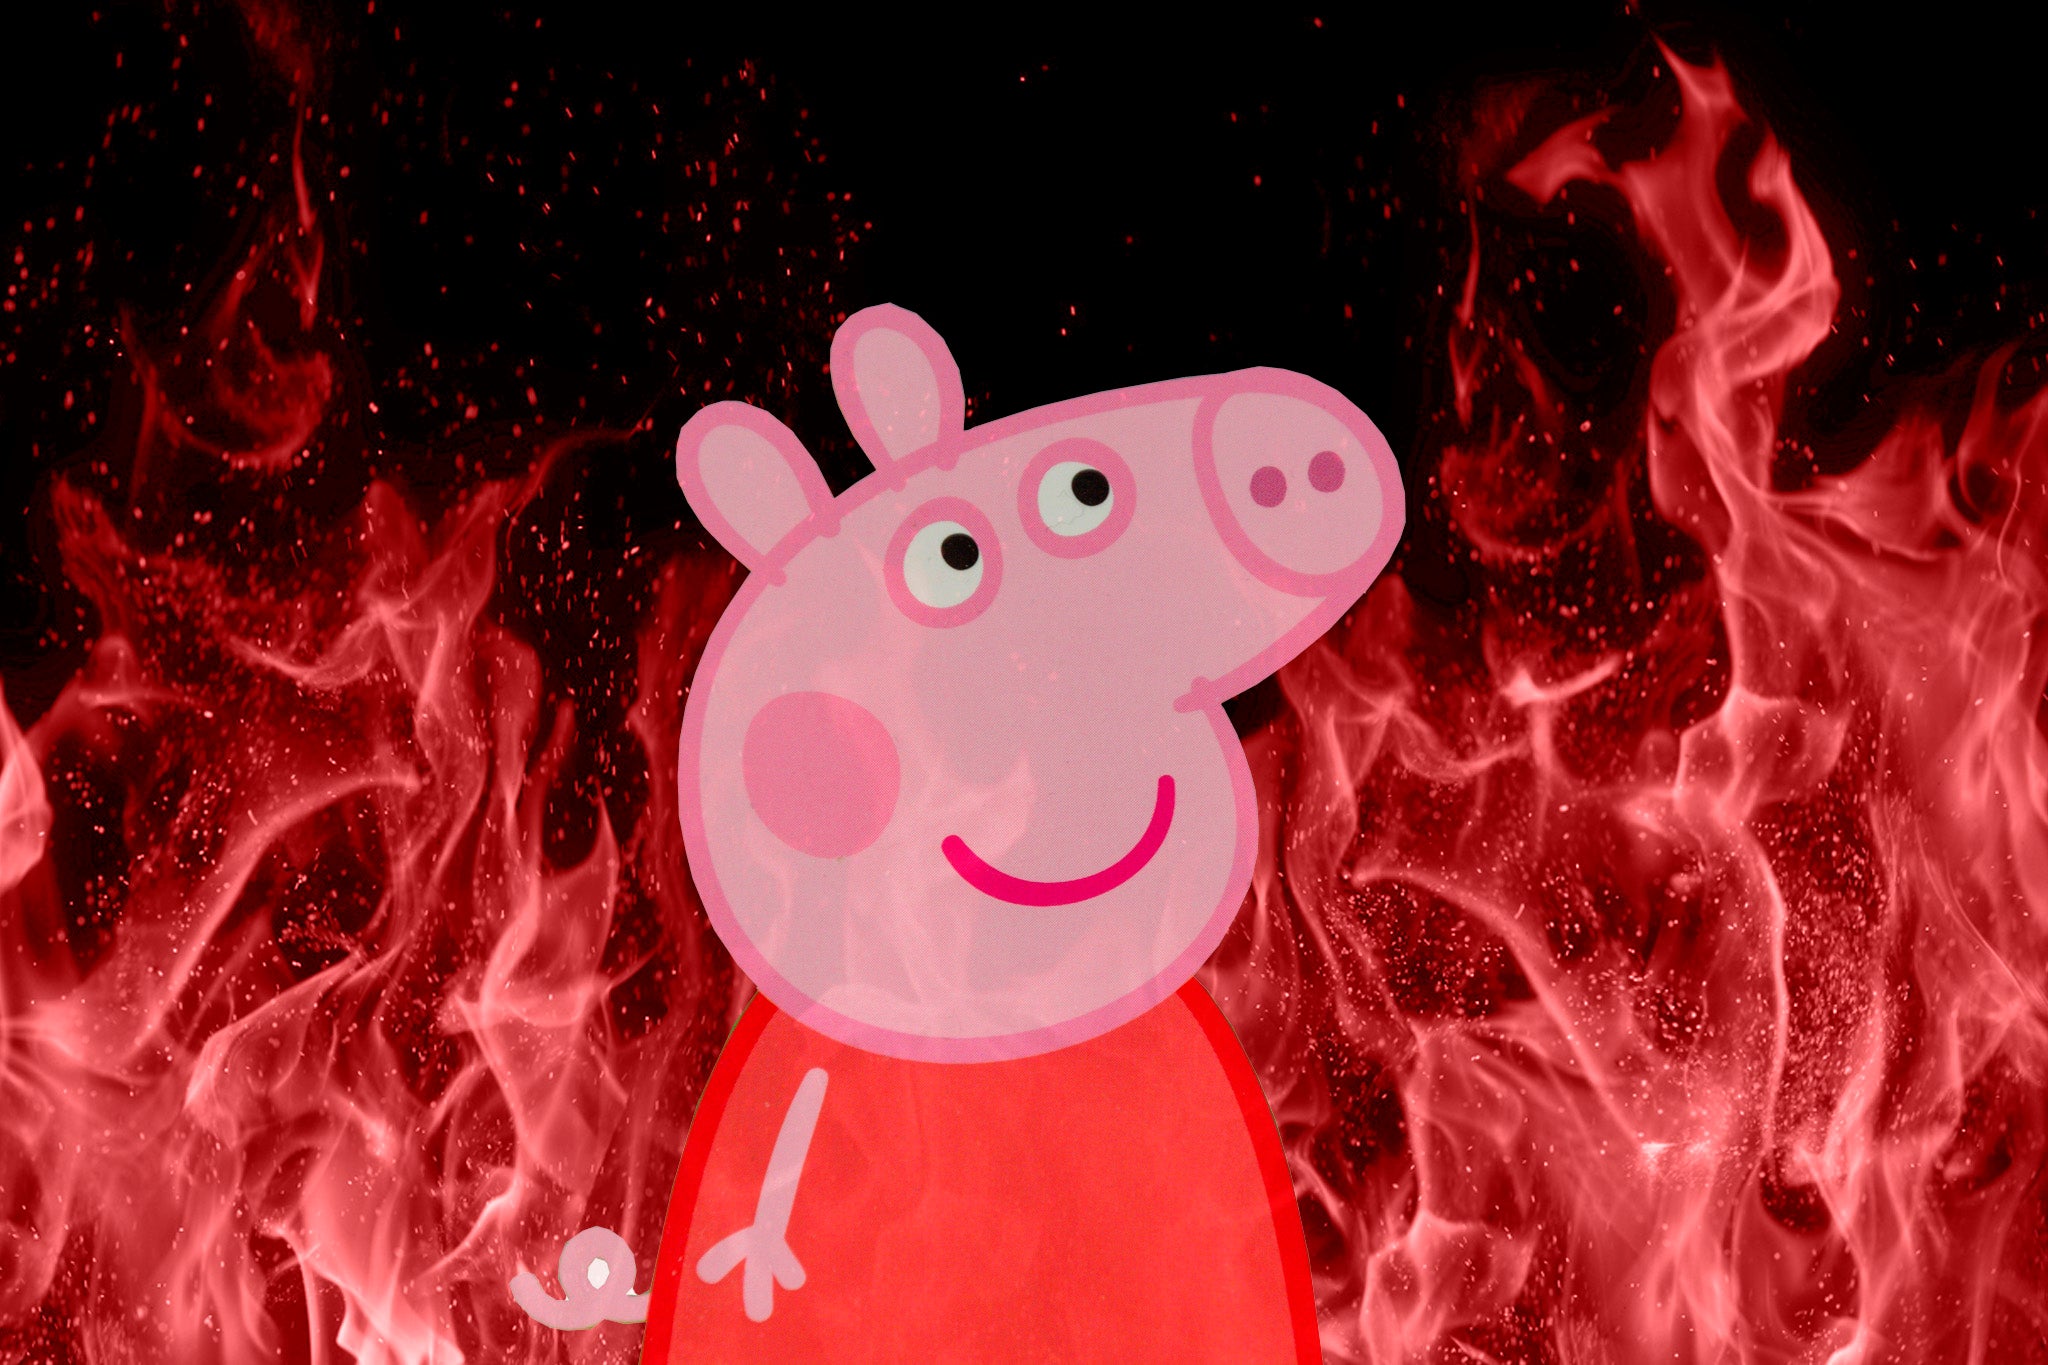 Is Peppa Pig a force for good or a force for evil?